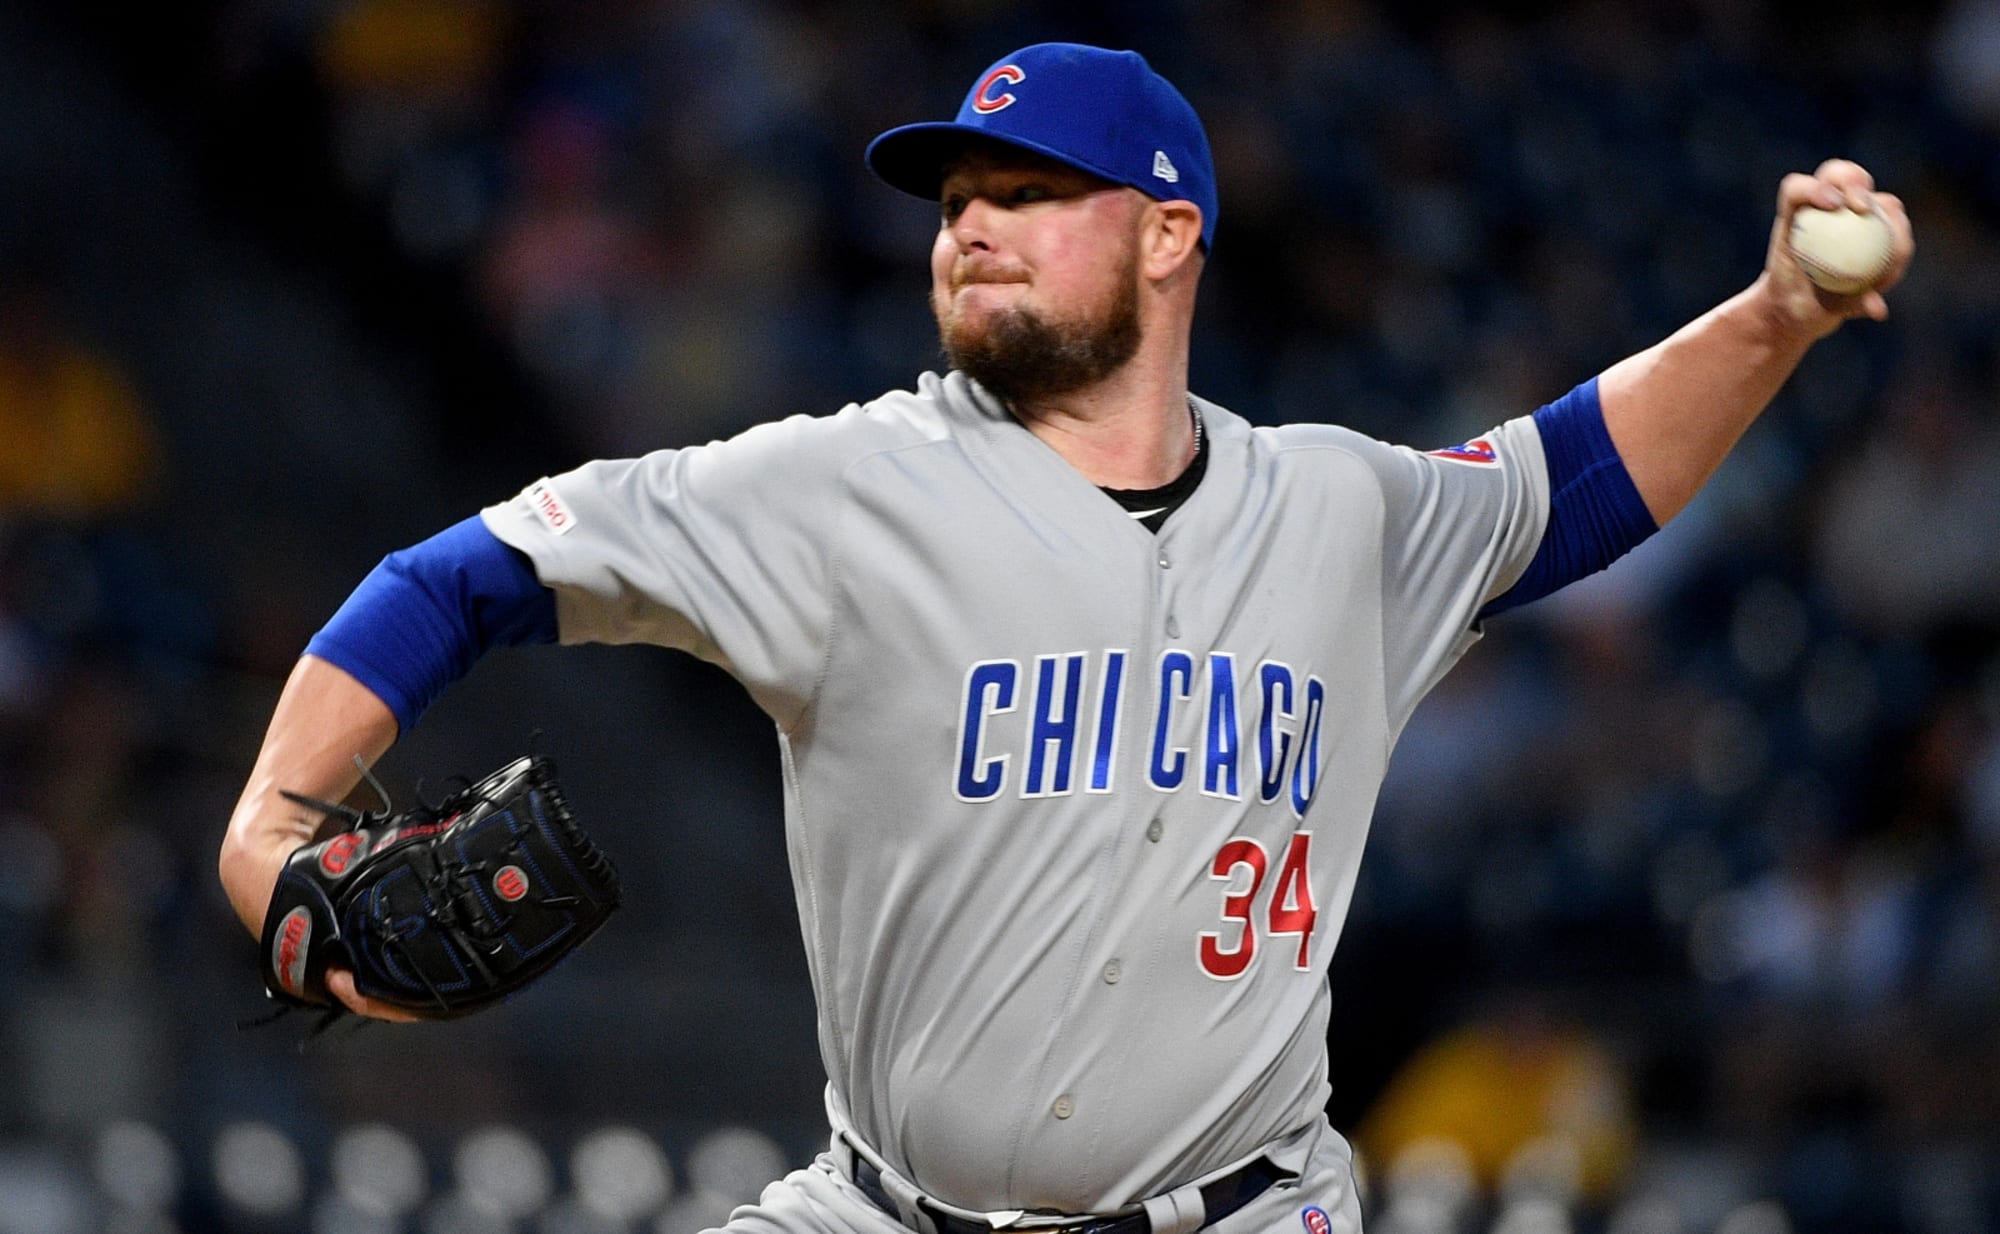 Jon Lester celebrates Cubs farewell with beers worth $47,000 for fans - THE SPORTS ROOM